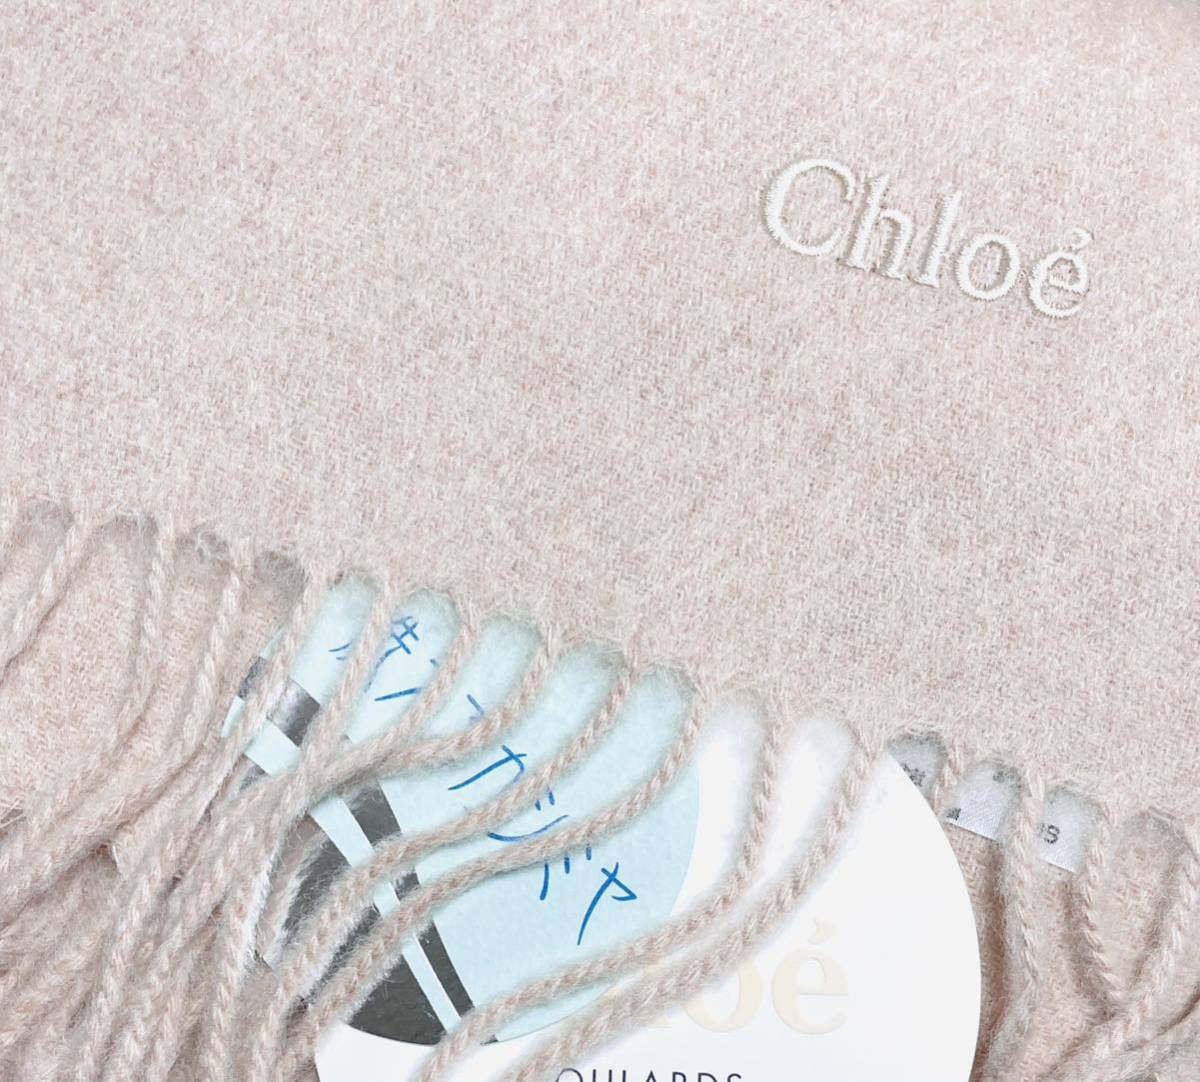  super rare! new goods unused * Chloe Chloe cashmere 100% stole n-ti beige large size muffler * license end according to domestic sale end complete sale goods 